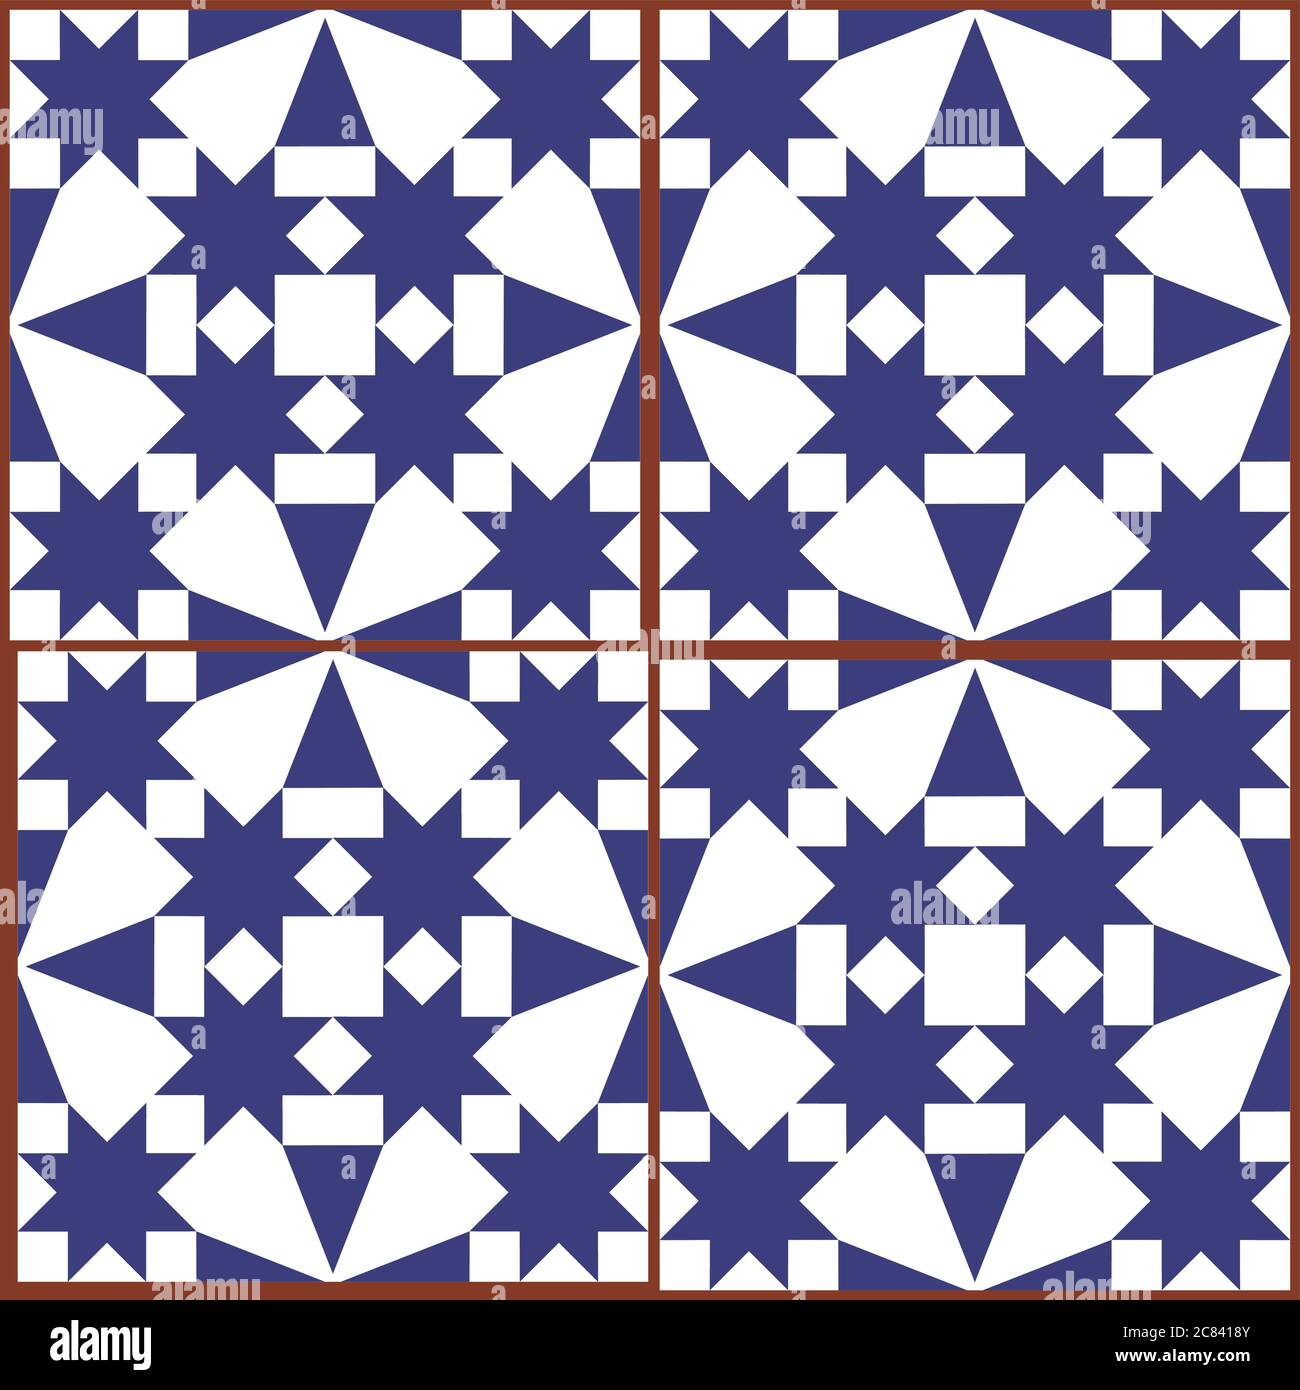 Moroccan and Turkish geoemetic tile seamless vector pattern, indigo textile design with stars and abstract shapes Stock Vector